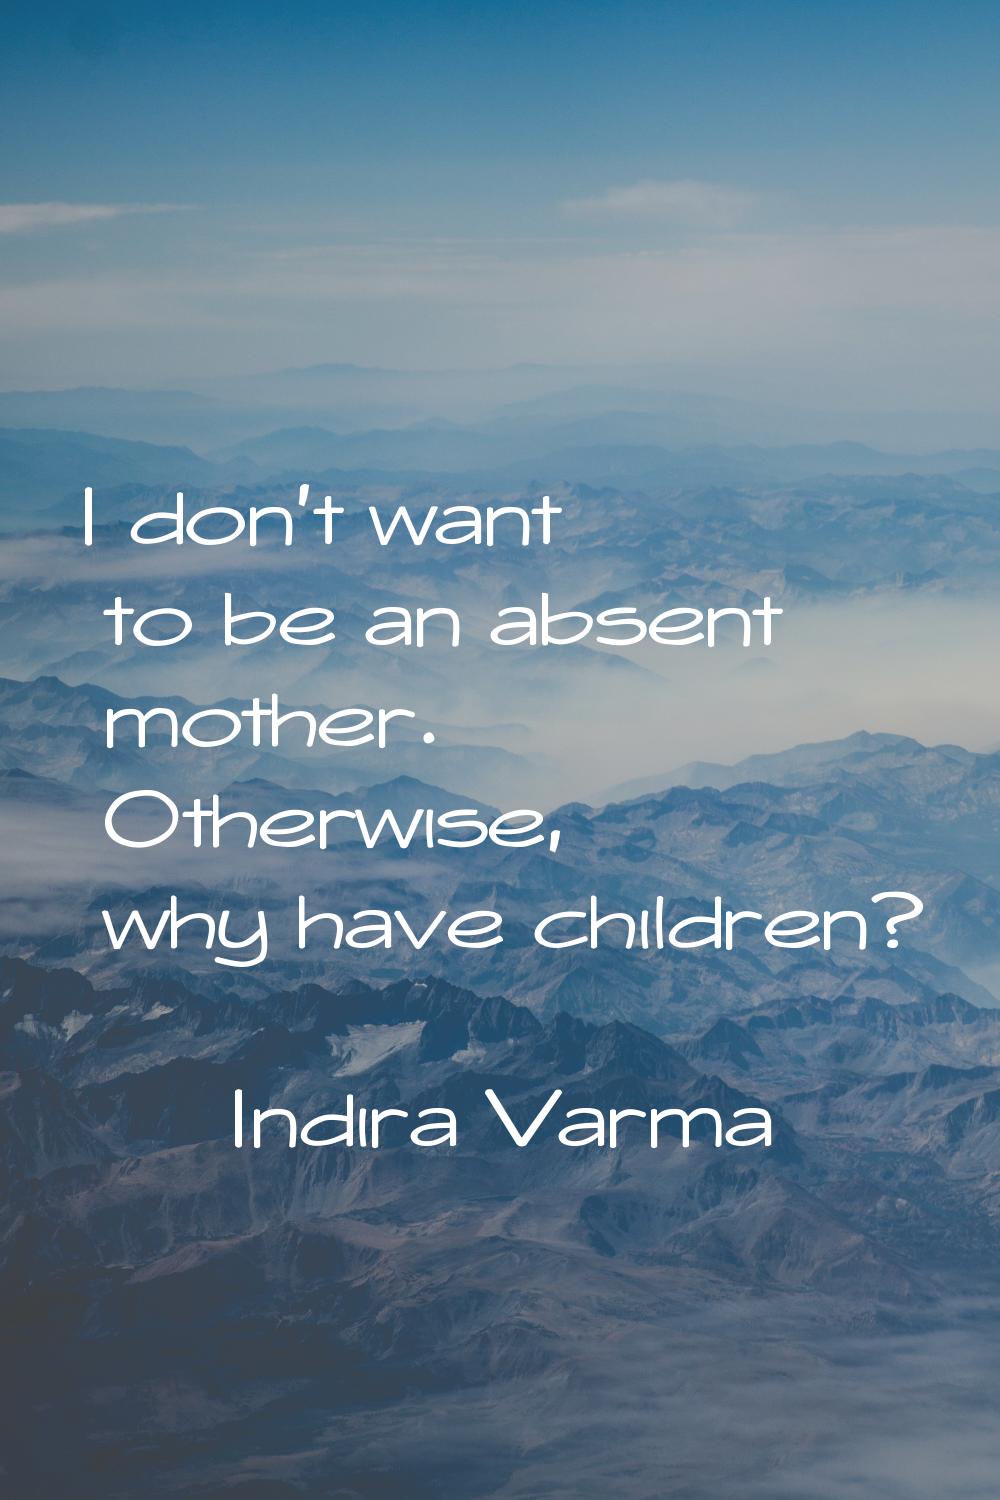 I don't want to be an absent mother. Otherwise, why have children?